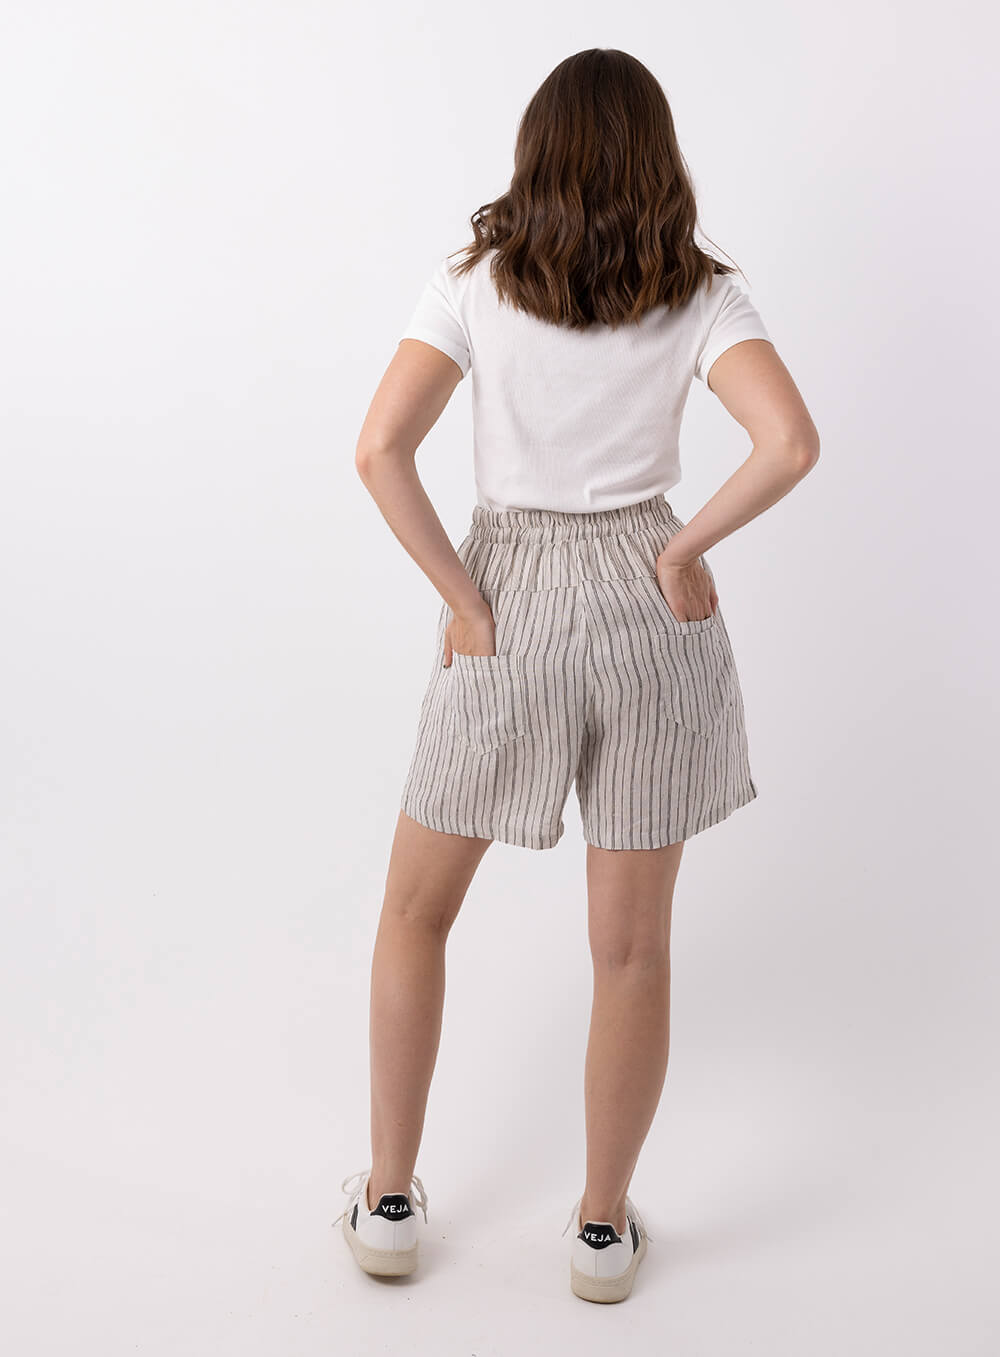 The Evan stripe linen shorts in beige colour with black thin stripes is made in 100% linen, features 2 side pockets and 2 back pockets, has wide elastic waistband with tie, 3 mock buttons and finish mid thigh length.